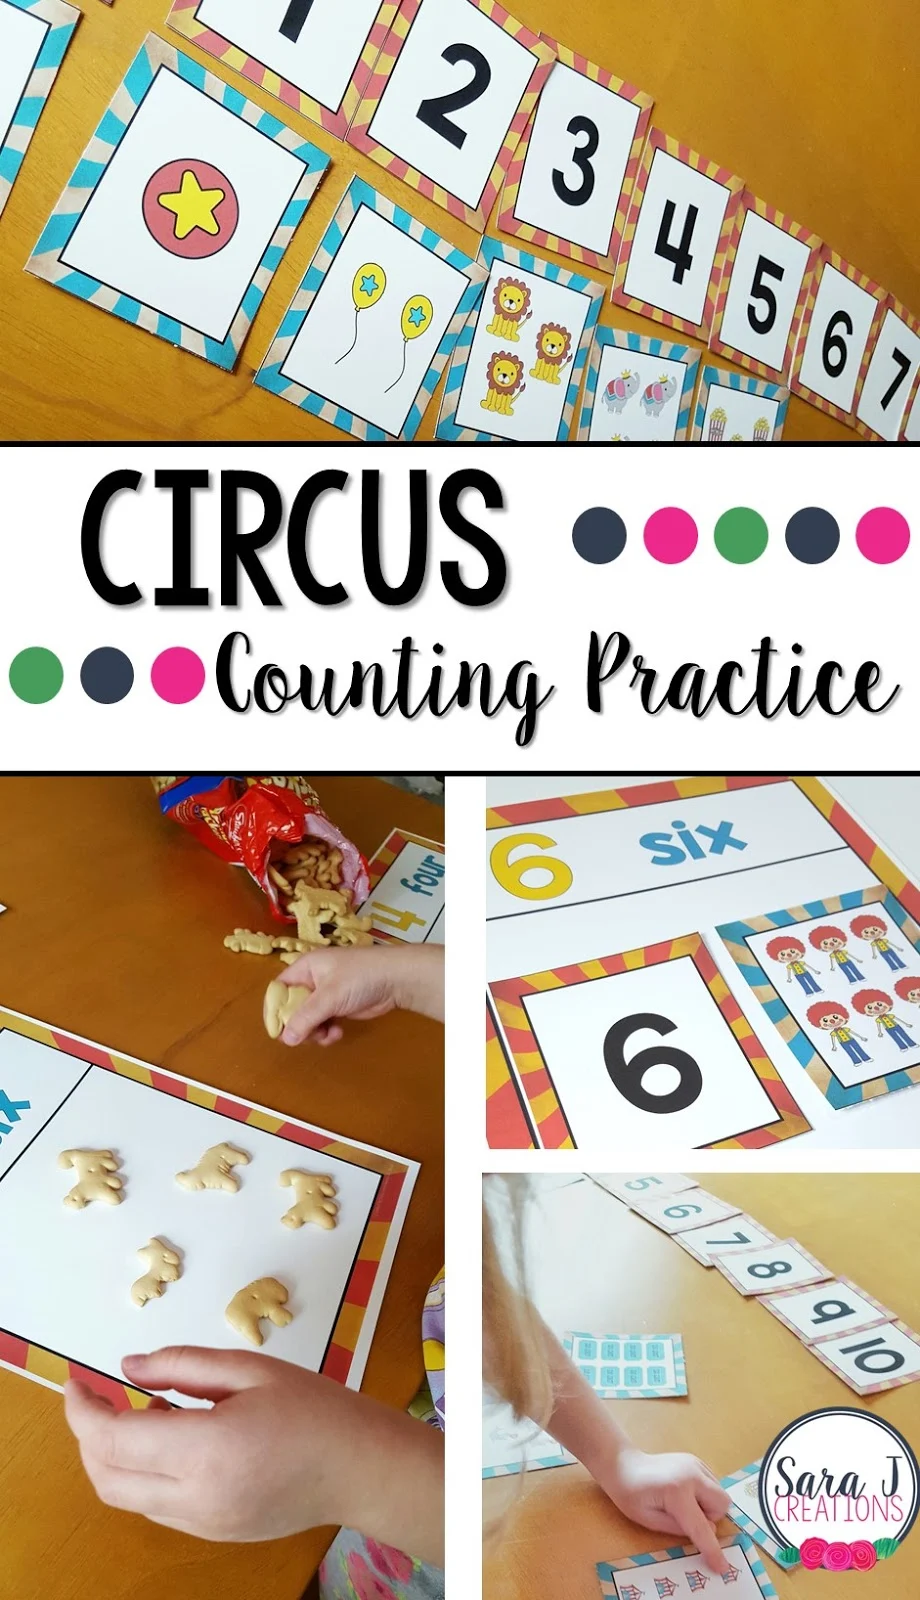 Cute ideas for using FREE circus themed number cards to practice sequencing, matching and 1 to 1 correspondence for numbers 1-10.